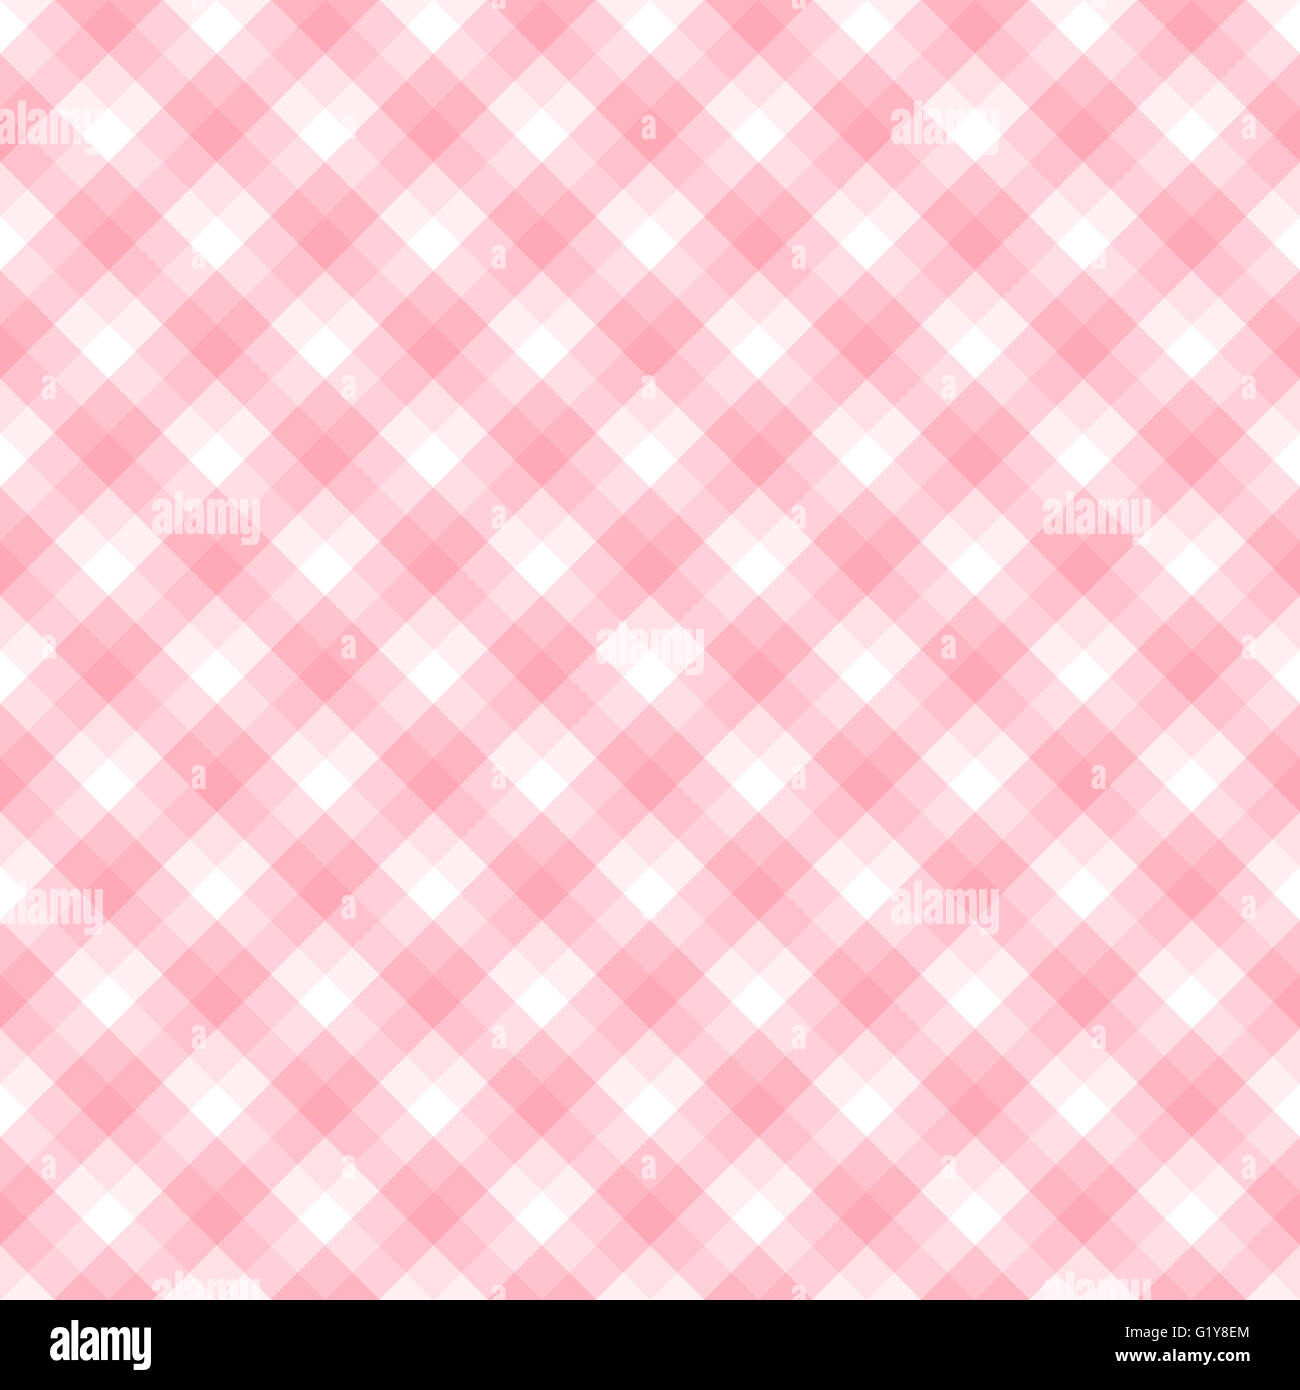 Checker pattern in hues on pink and white, seamless background Stock Photo